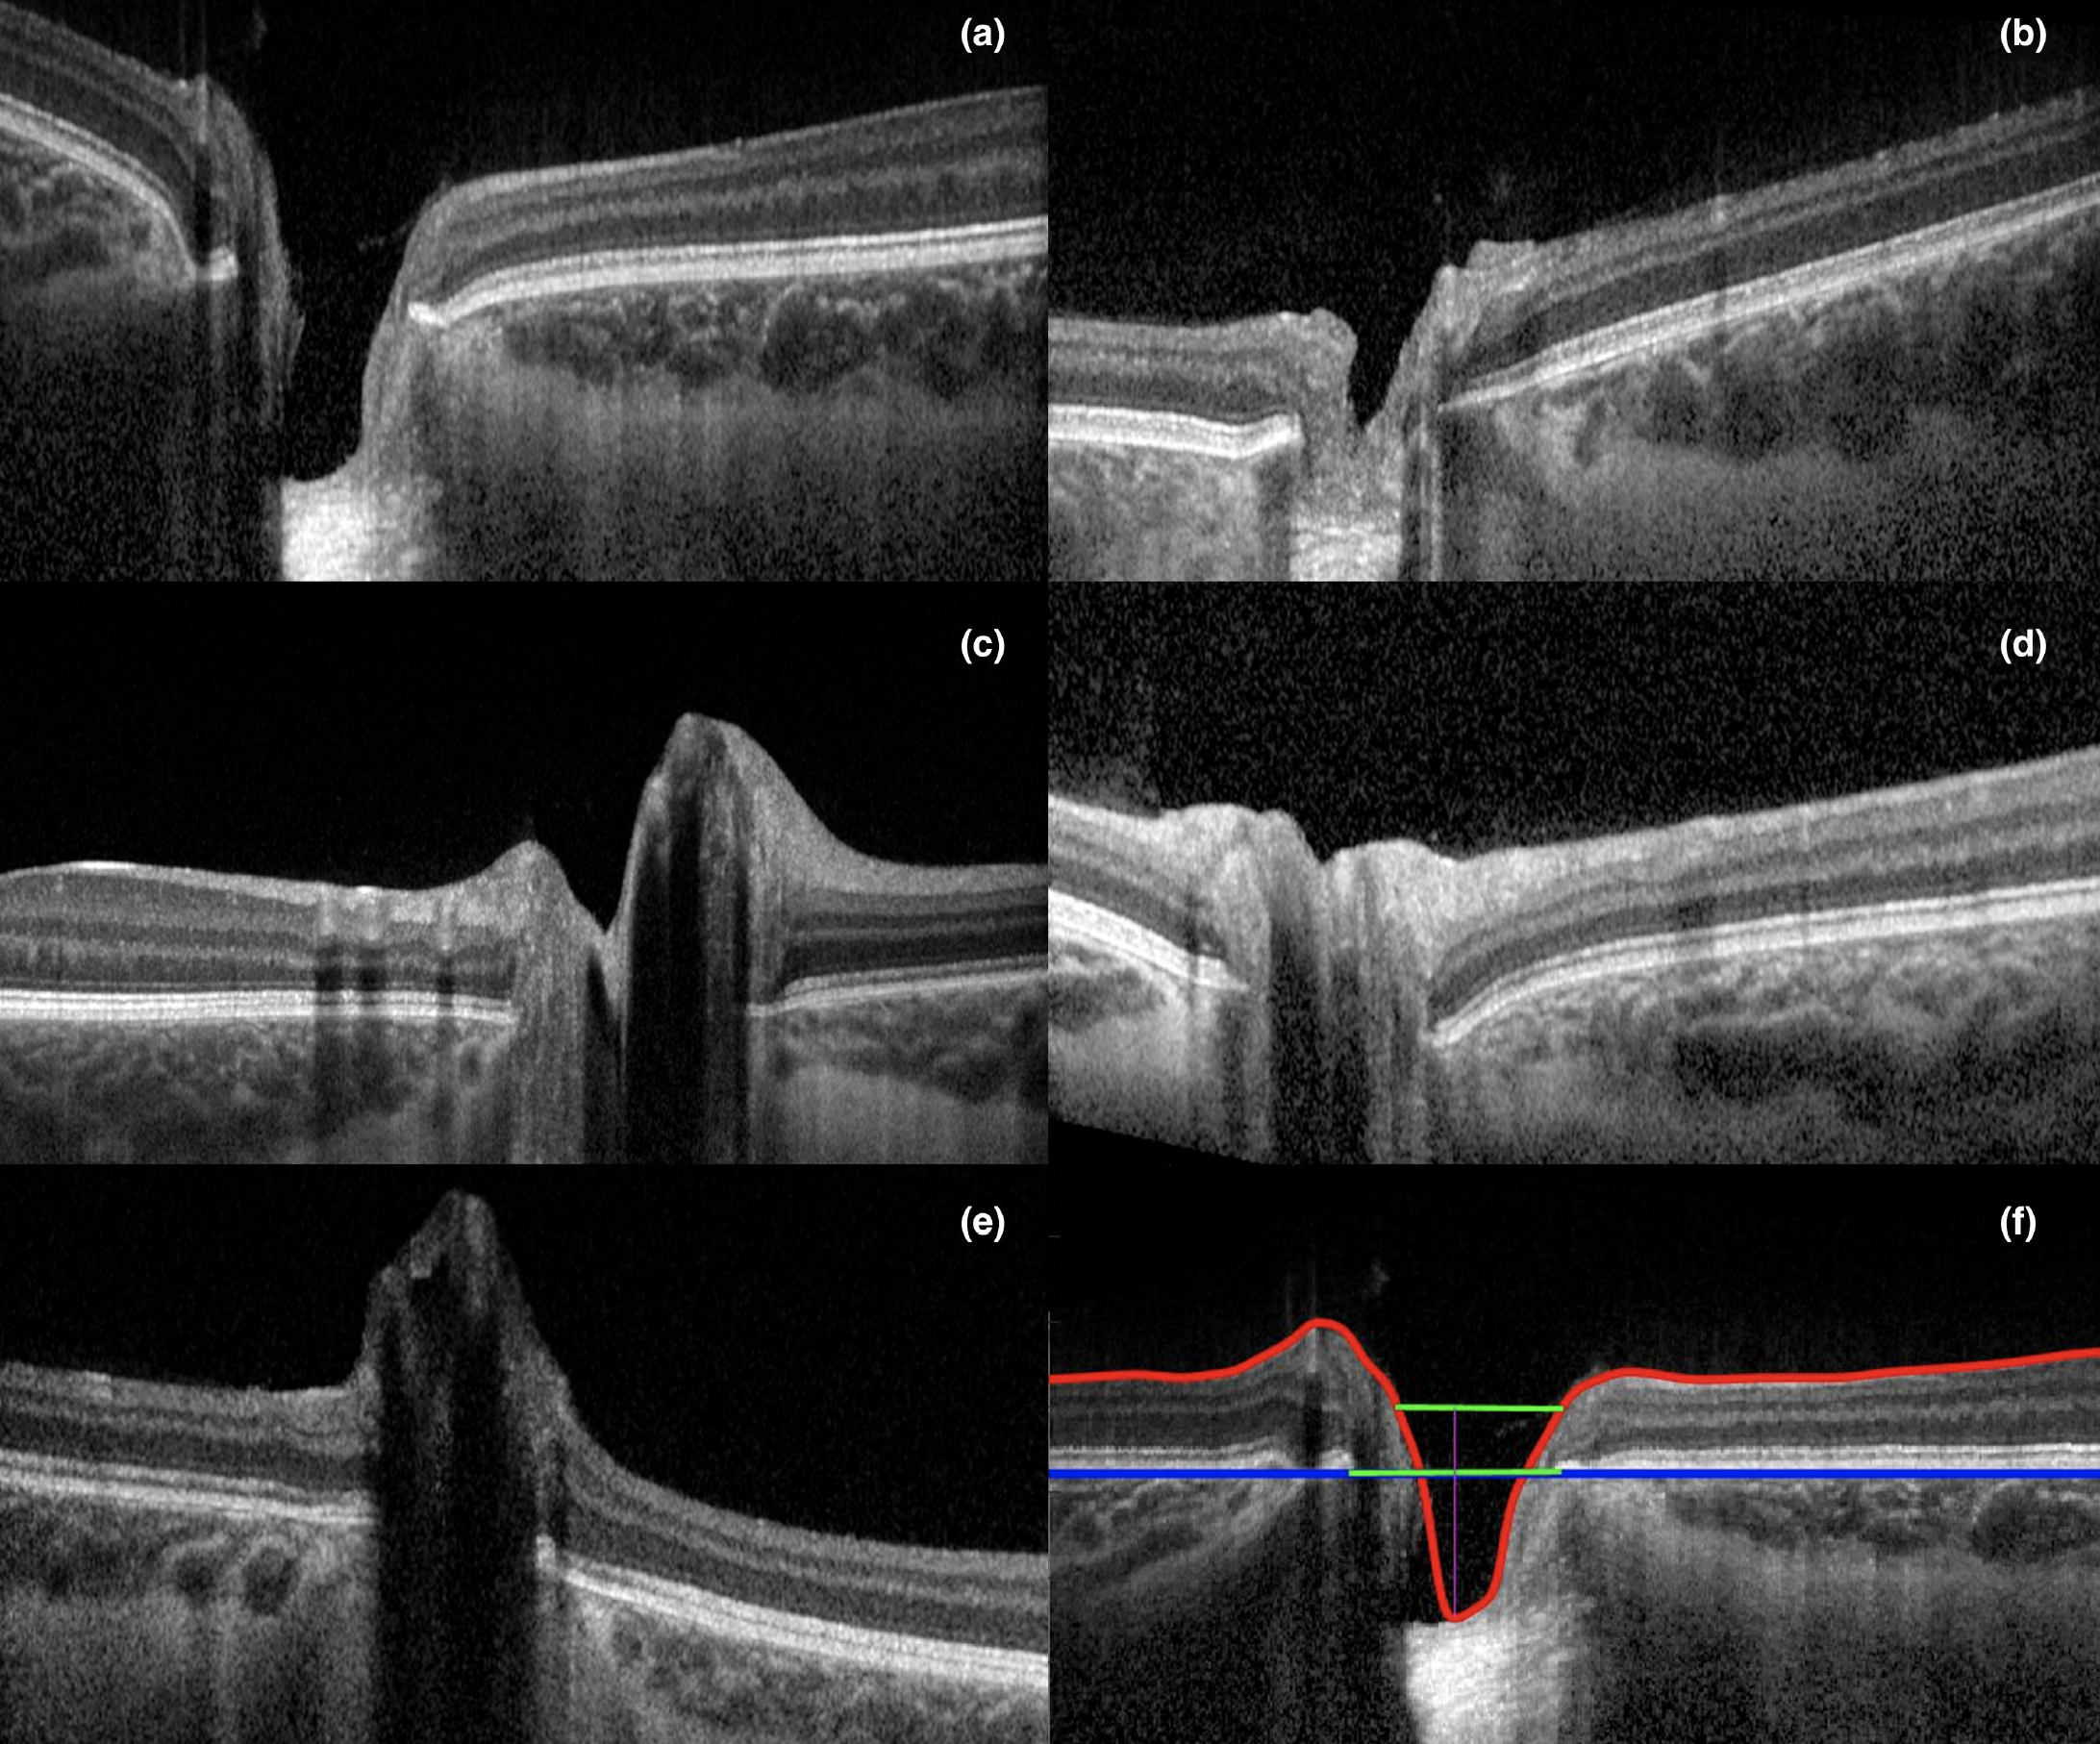 The study group saw about 30% of eyes with a ‘subnormal’ fovea and lower prevalence of foveal hypoplasia (35%) than another study. These images of study participants show a wide range of physiological feature of optic nerve hypoplasia:(a) cup below RPE, (b) cup below IRL, (c) cup above IRL, (d) no cup and  (e) peak formation. Image (f) shows demarcations of the ILM, RNFL, RPE and Bruch’s membrane opening.